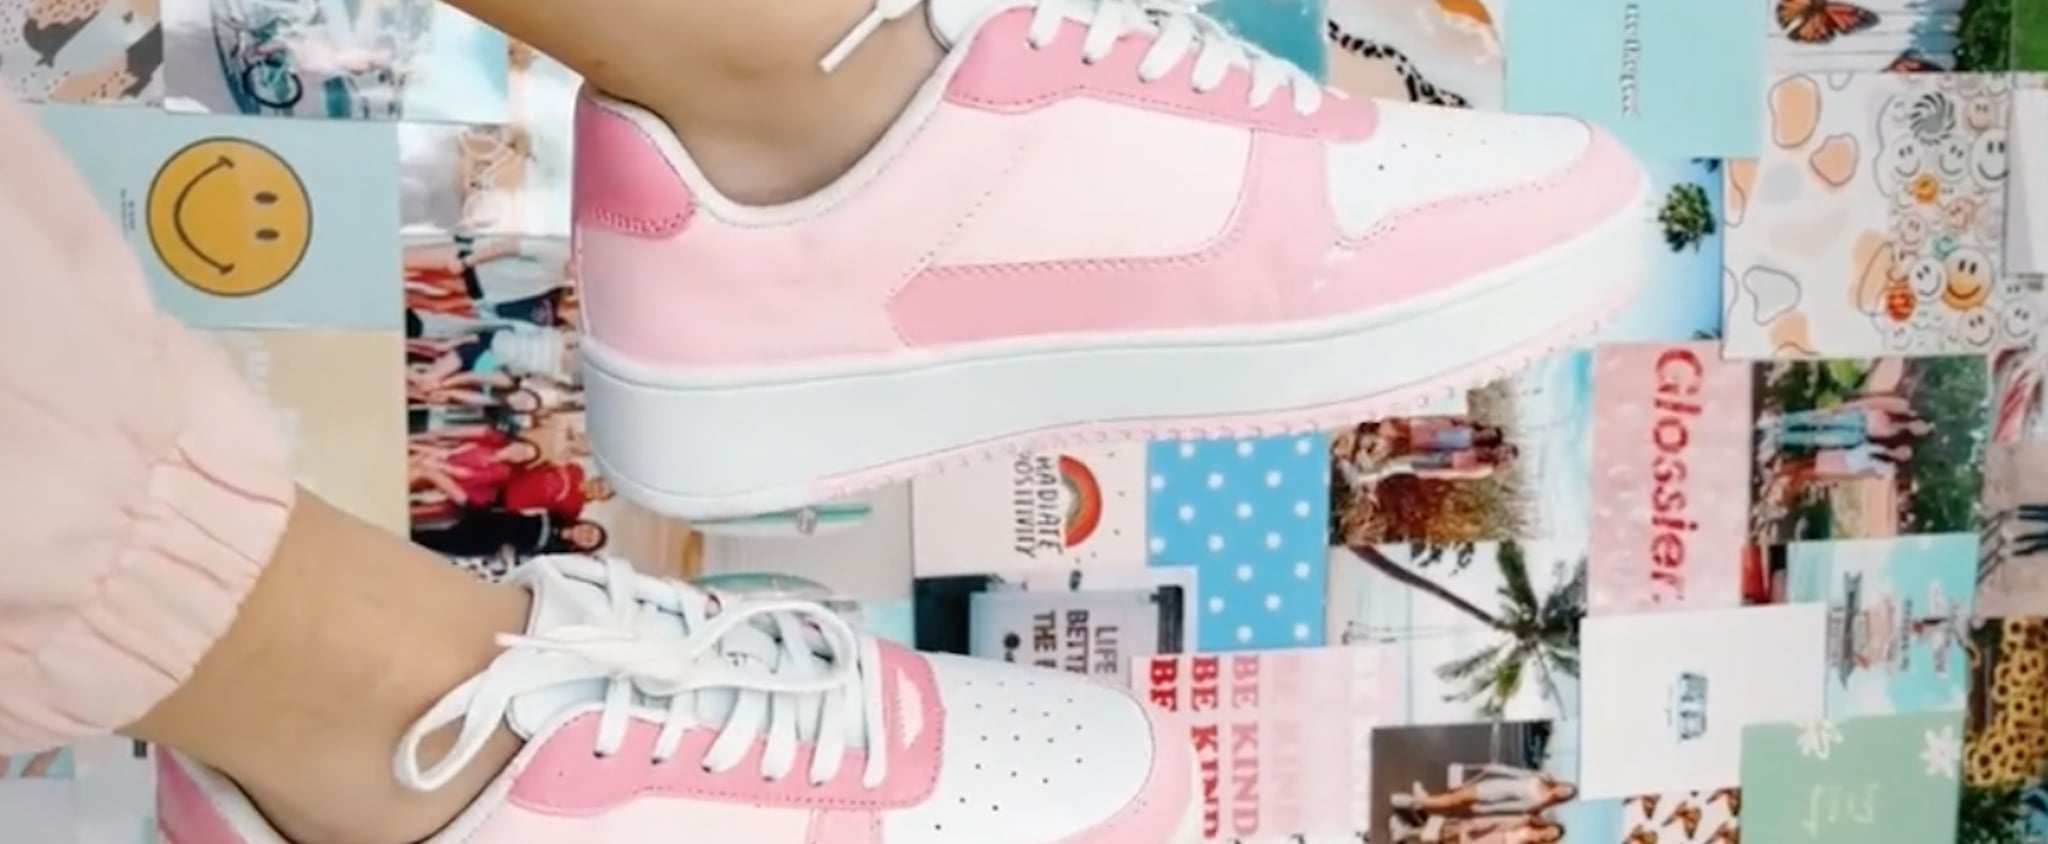 TikTok swears by these SneakERASERS for keeping their shoes bright white:  'It's a magic eraser for your sneakers!